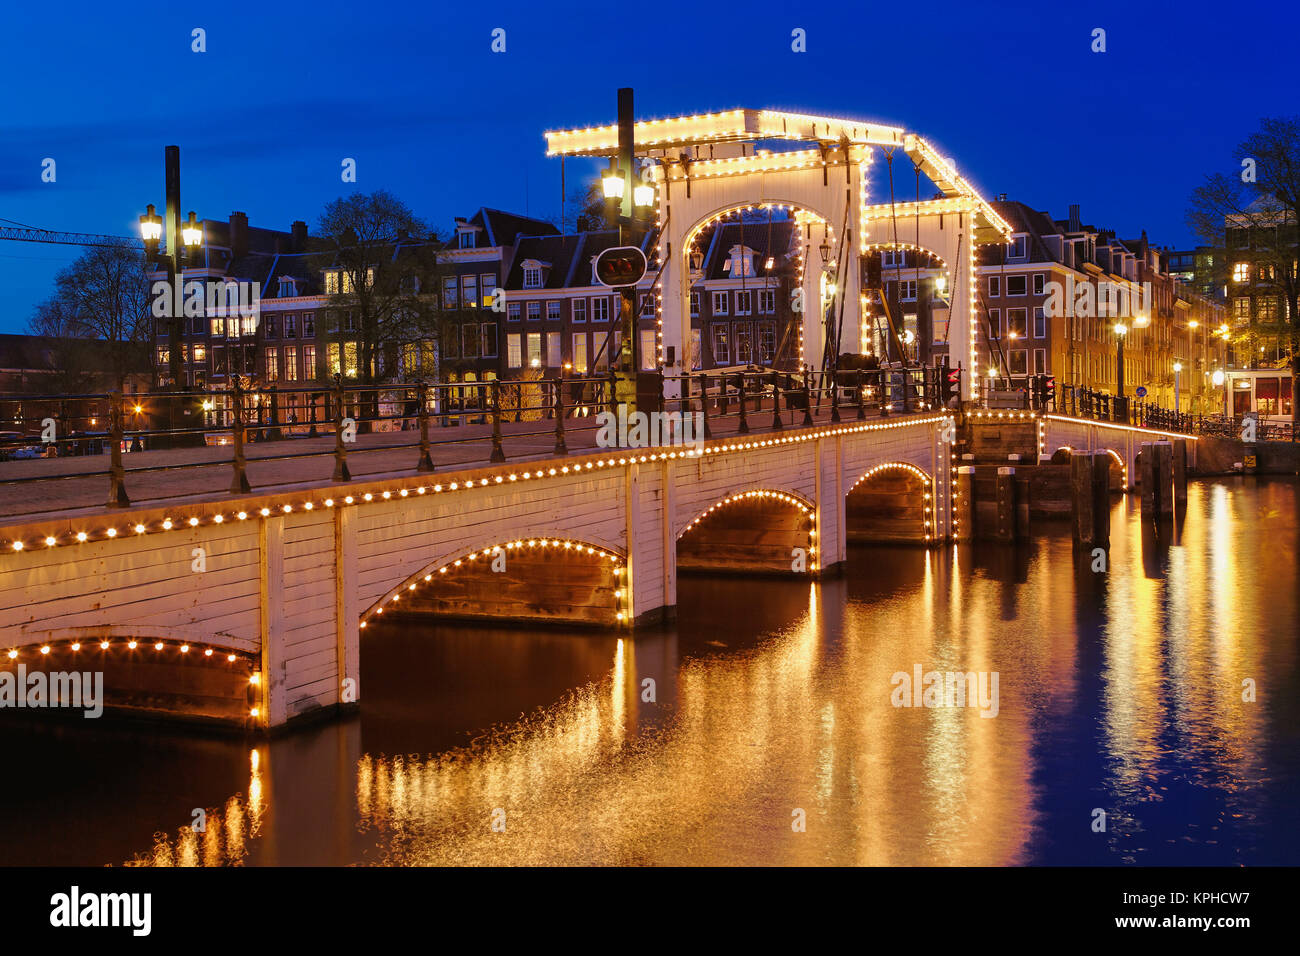 Dusk view of Magere Brug or Skinny Bridge and Amstel River, Netherlands, Holland Stock Photo